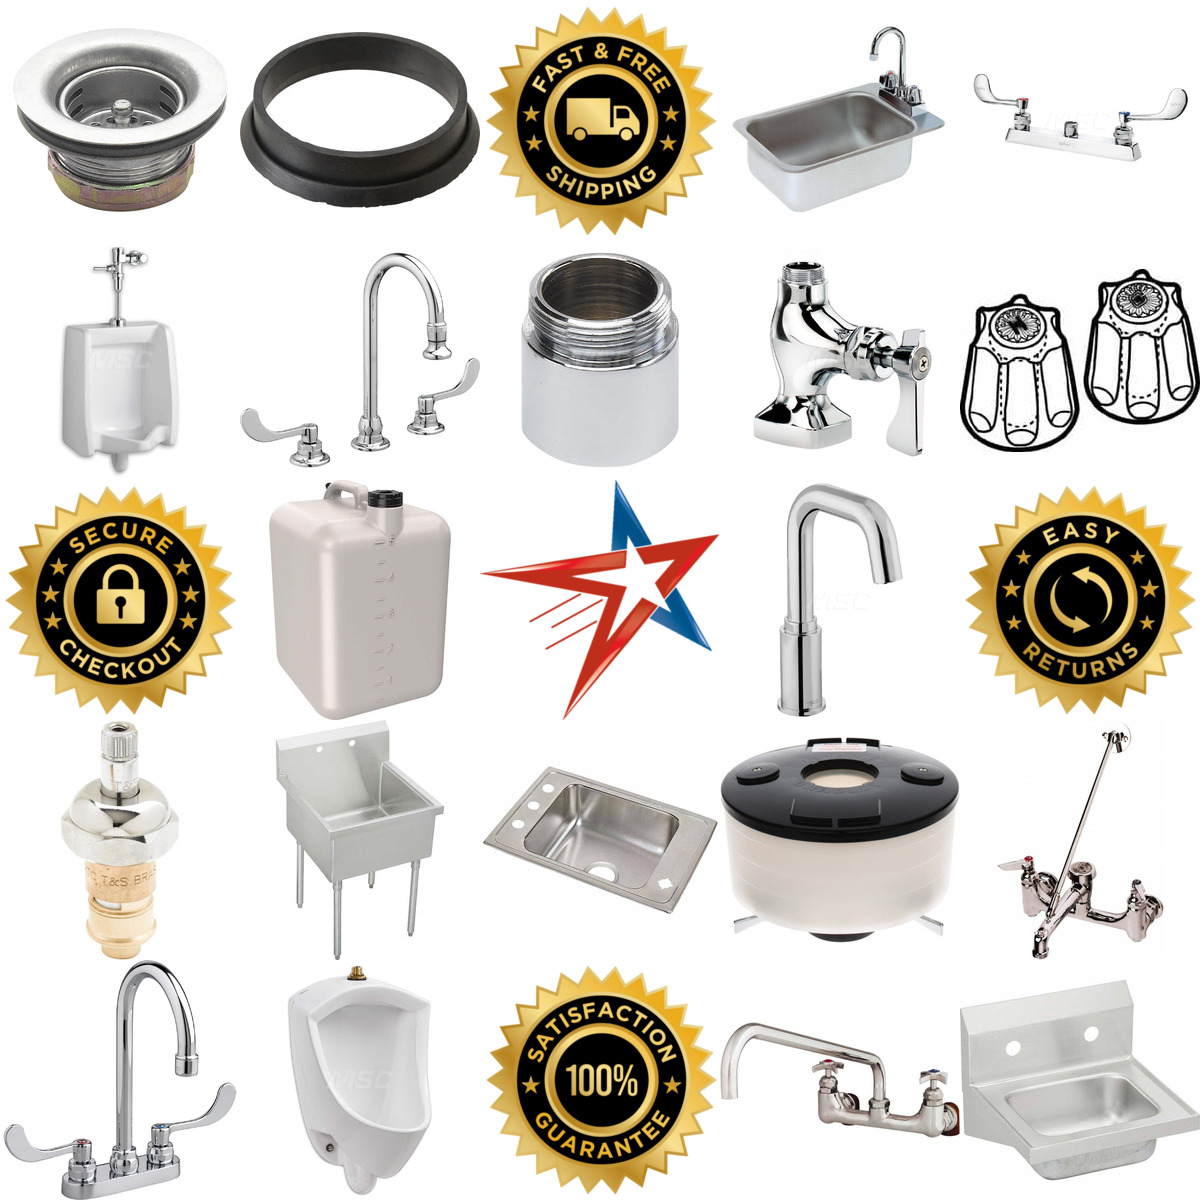 A selection of Faucets Sinks and Bathrooms products on GoVets